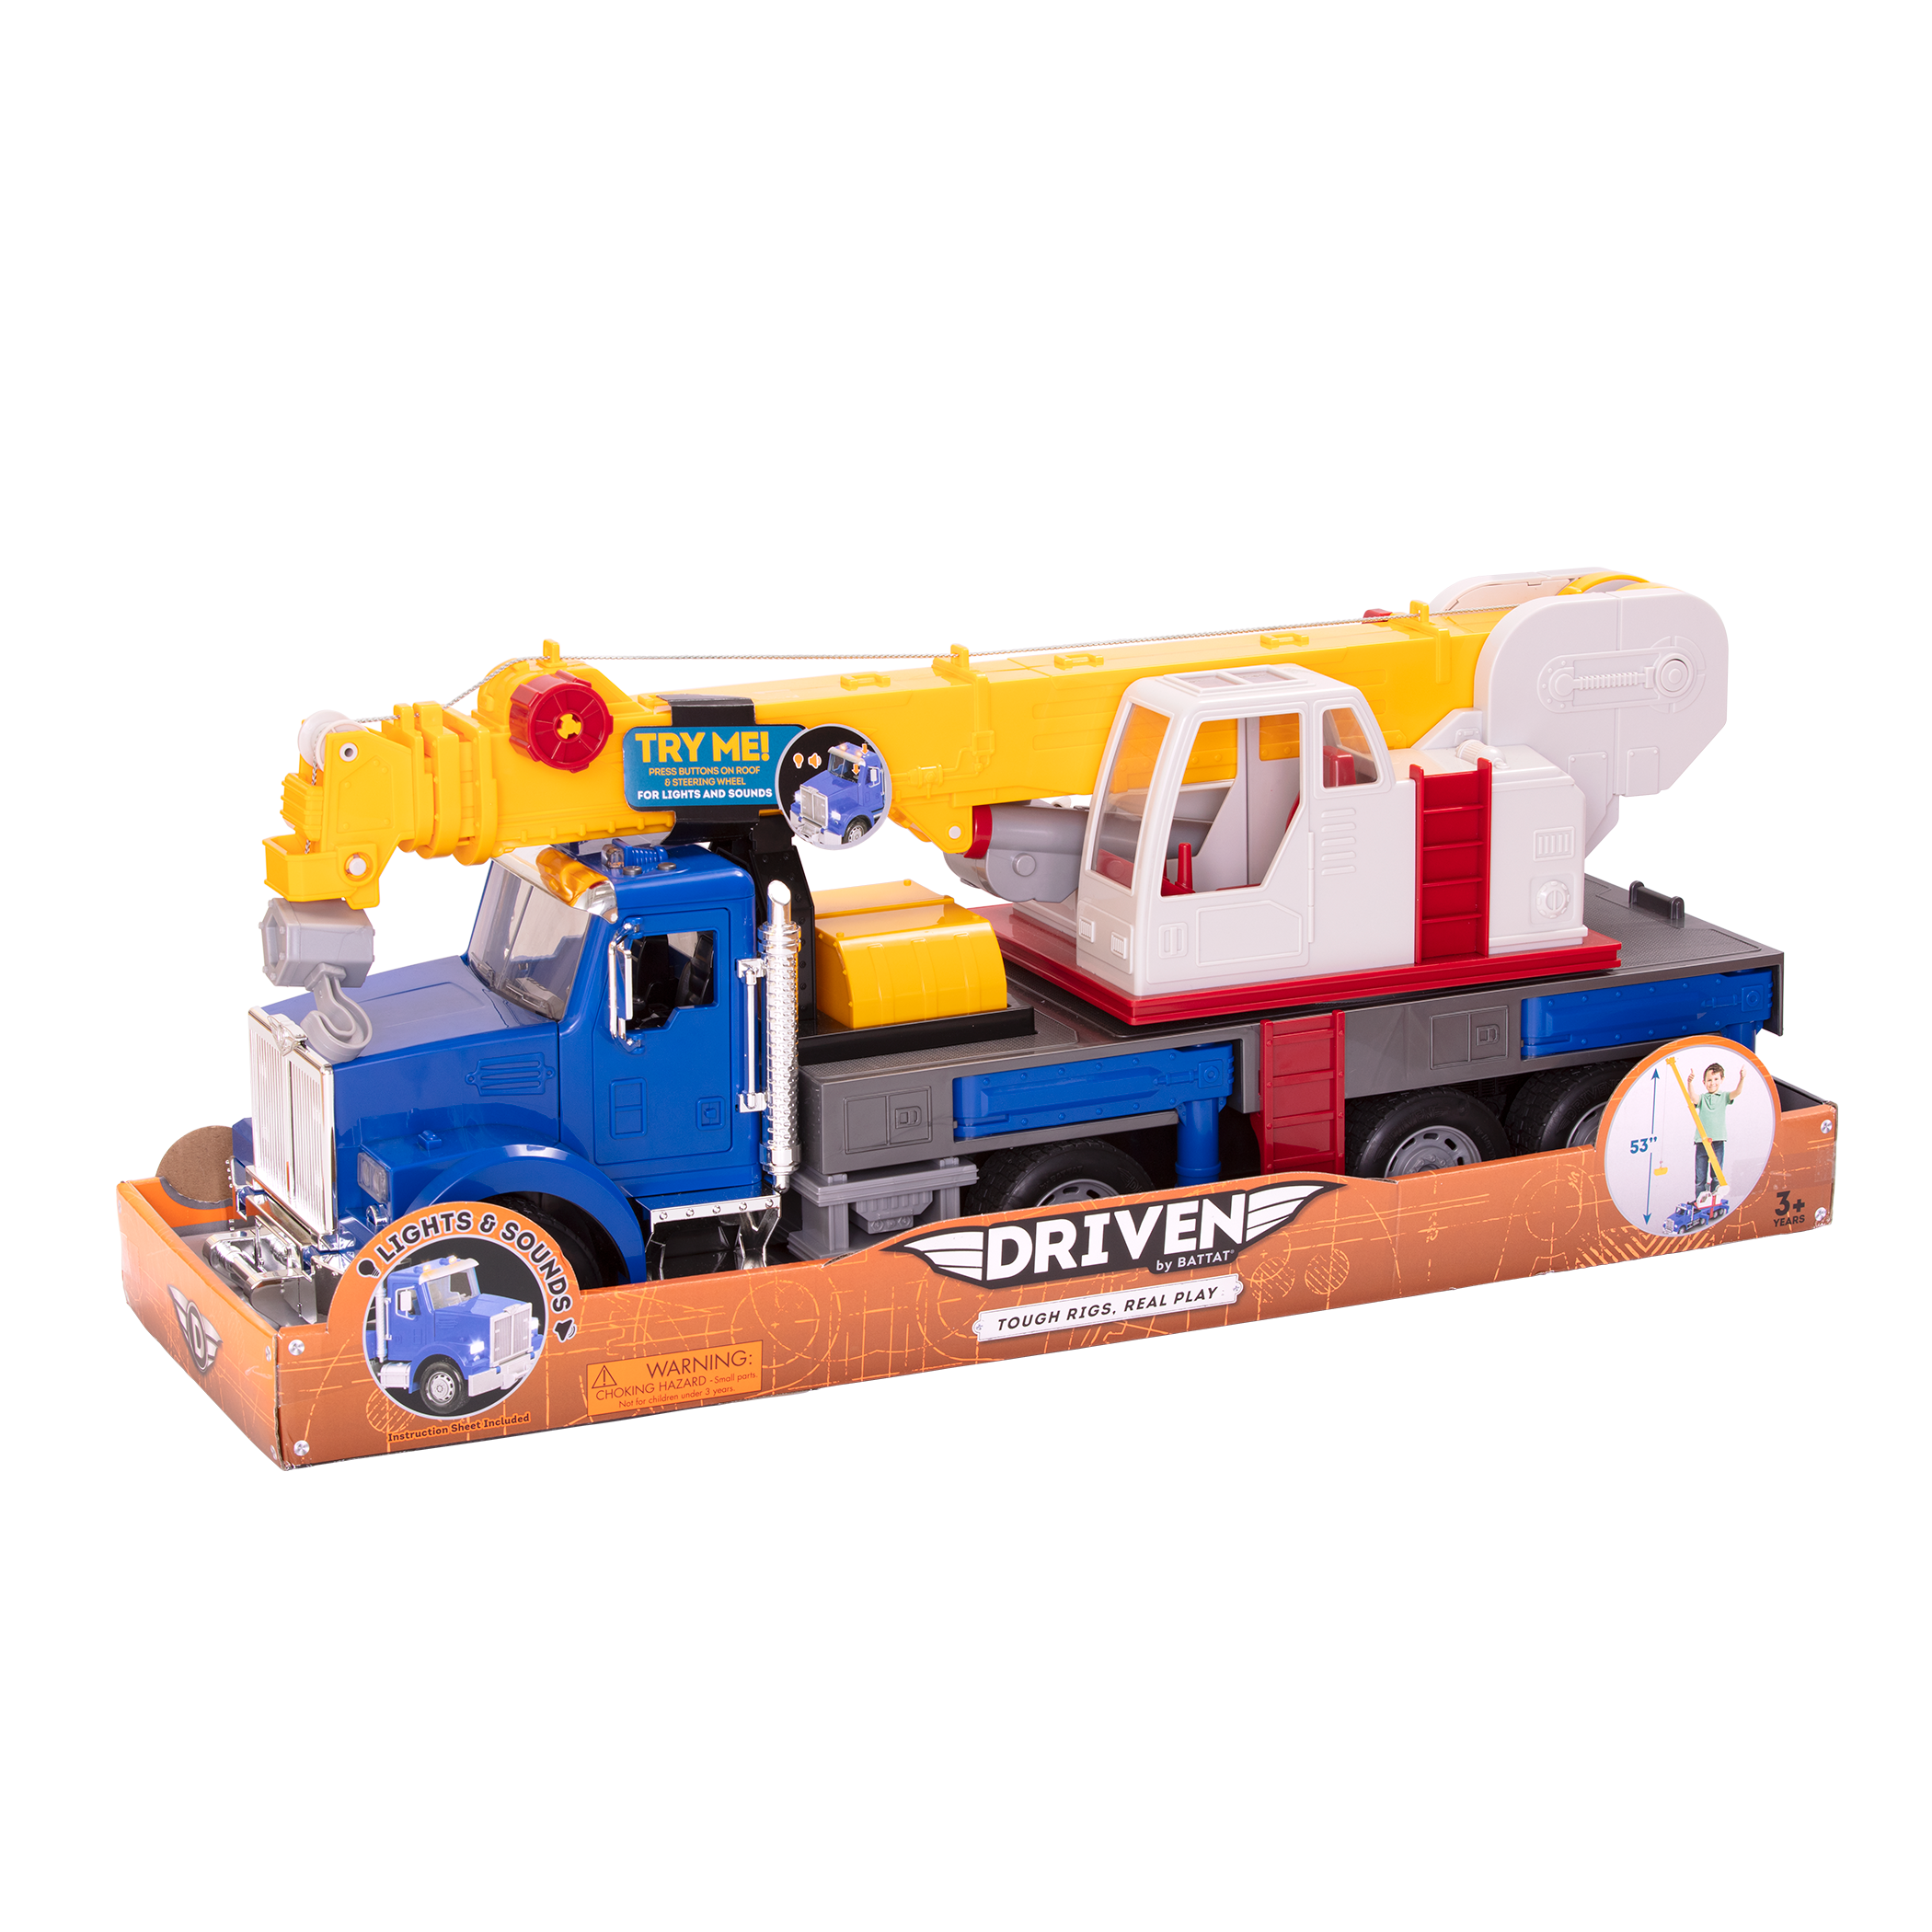 Large Toy Truck with Movable Parts DRIVEN Jumbo Crane Truck 